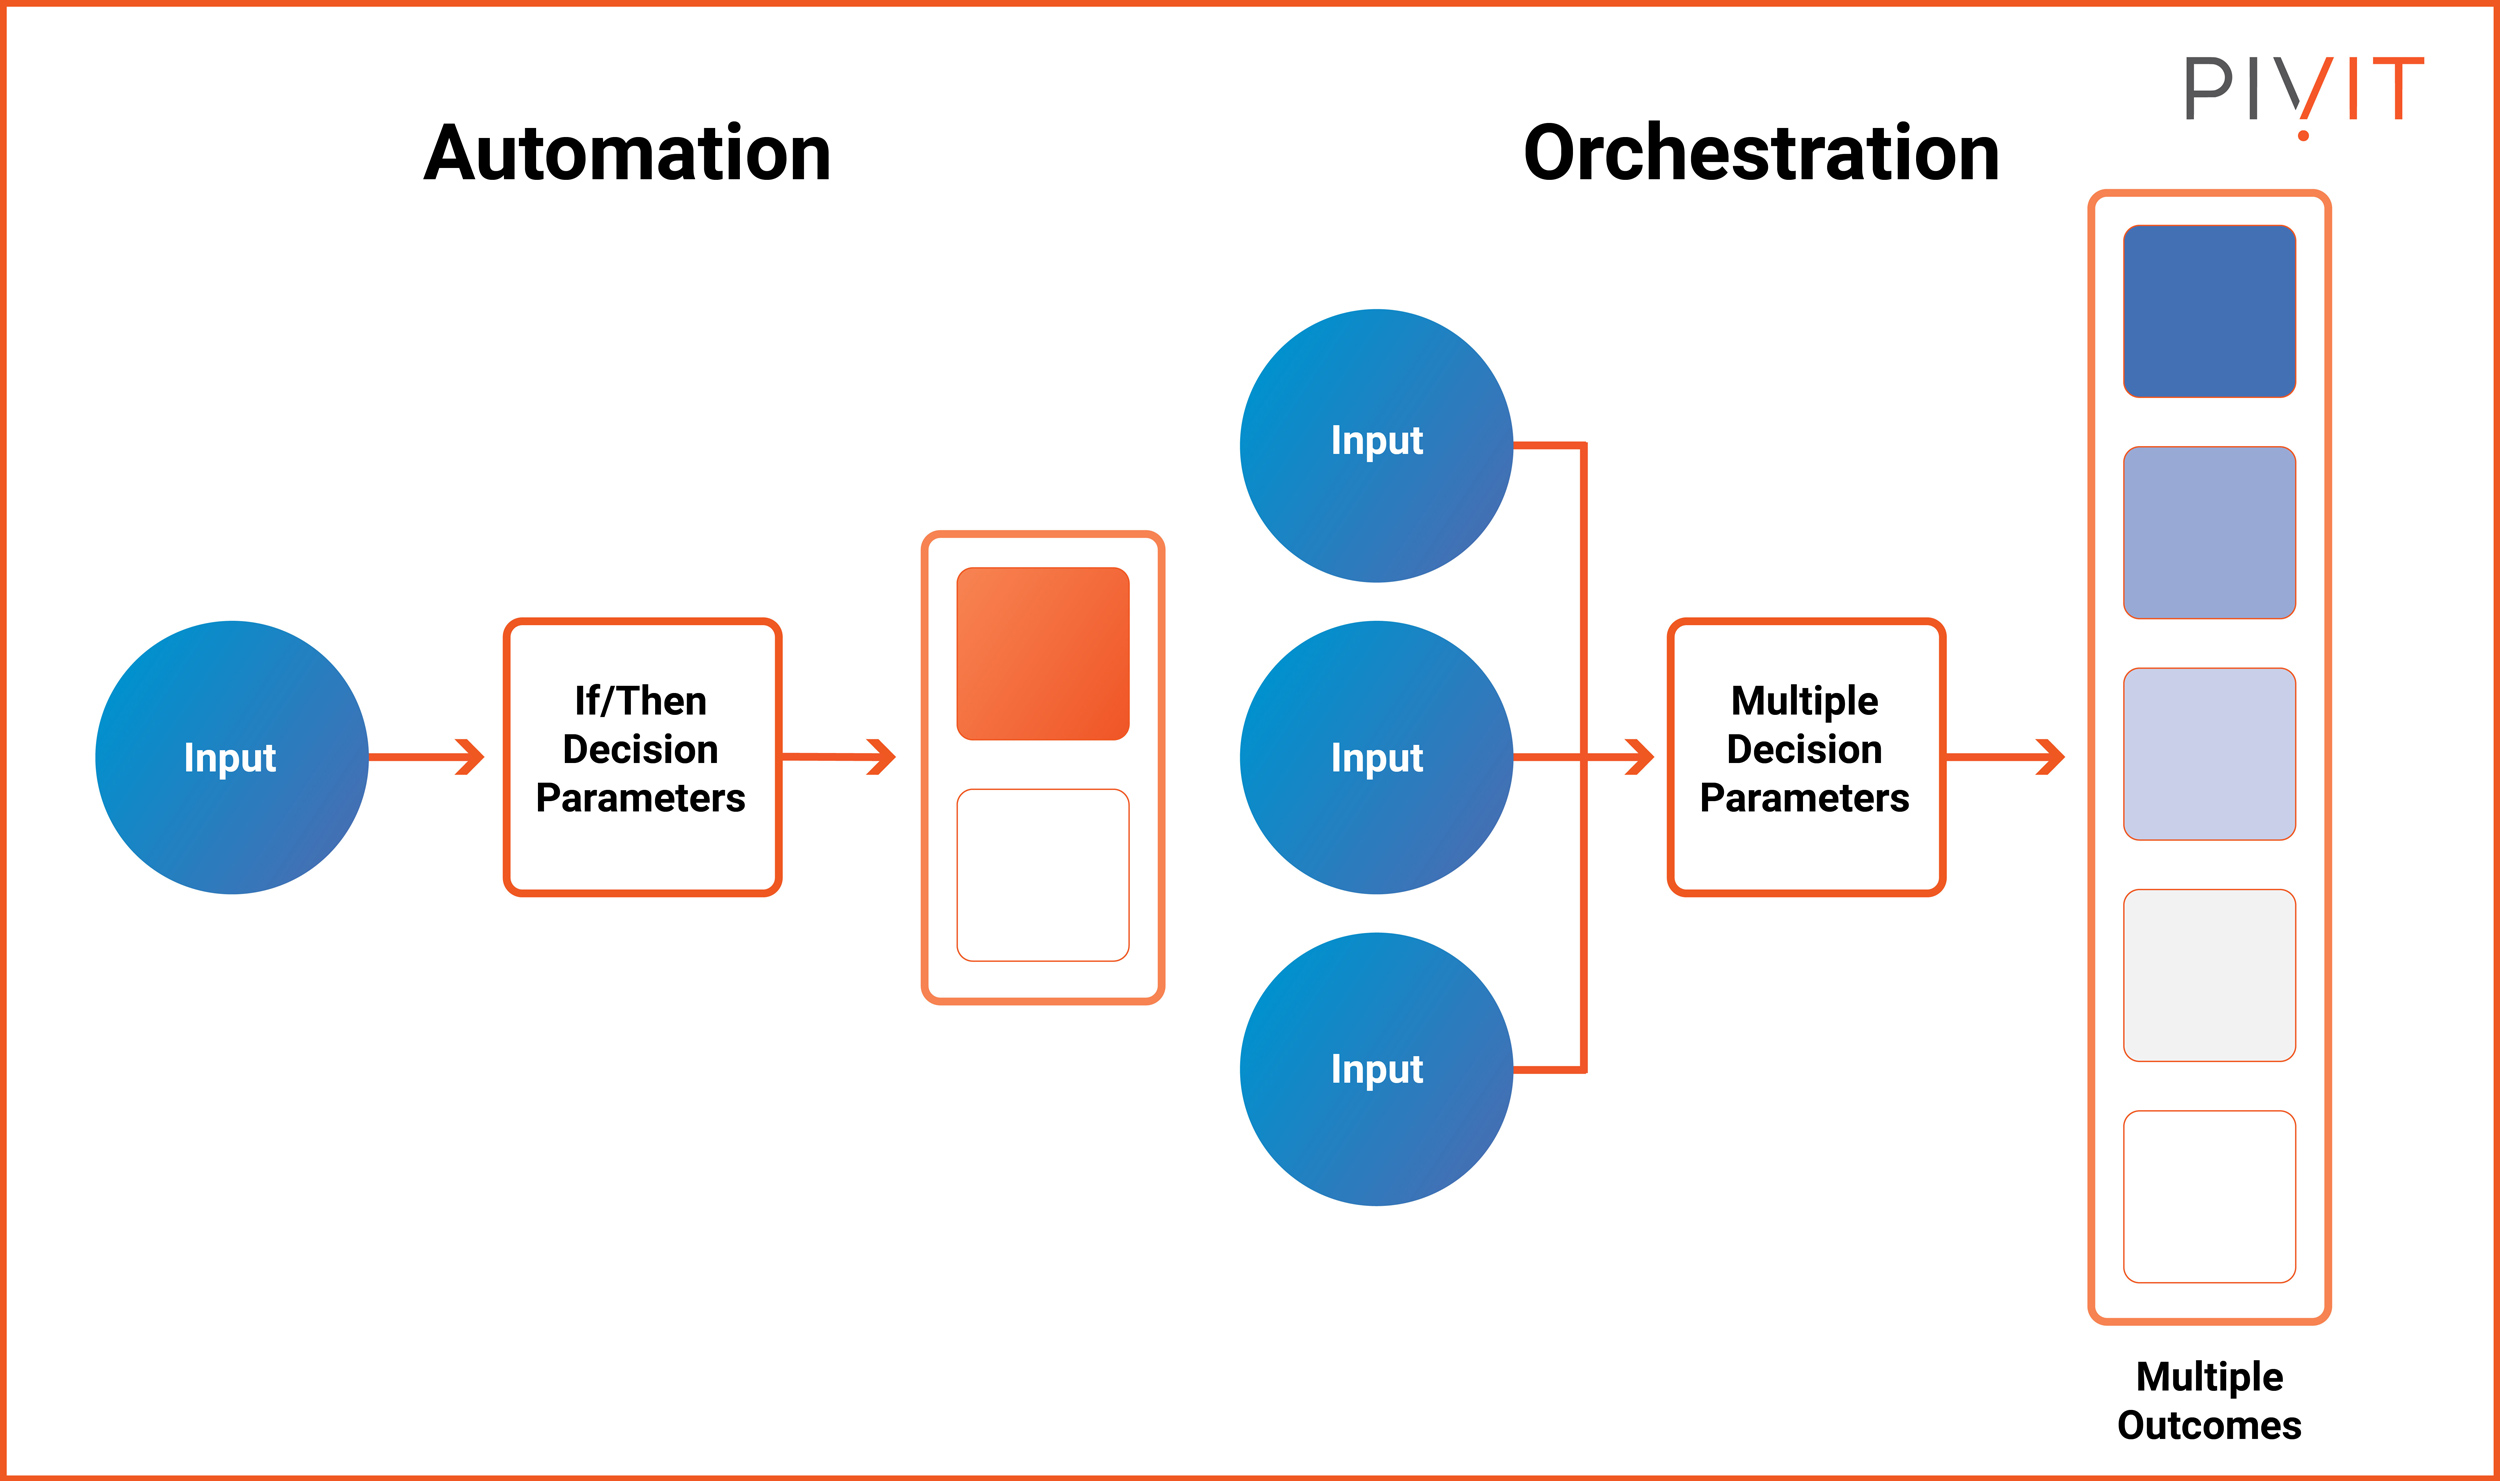 Diagram contrasting Automation, which shows a linear process from Input to If/Then Decision Parameters to Outcome, with Orchestration, which displays multiple Inputs leading to Multiple Decision Parameters and Multiple Outcomes, summarized by the word PIVOT.